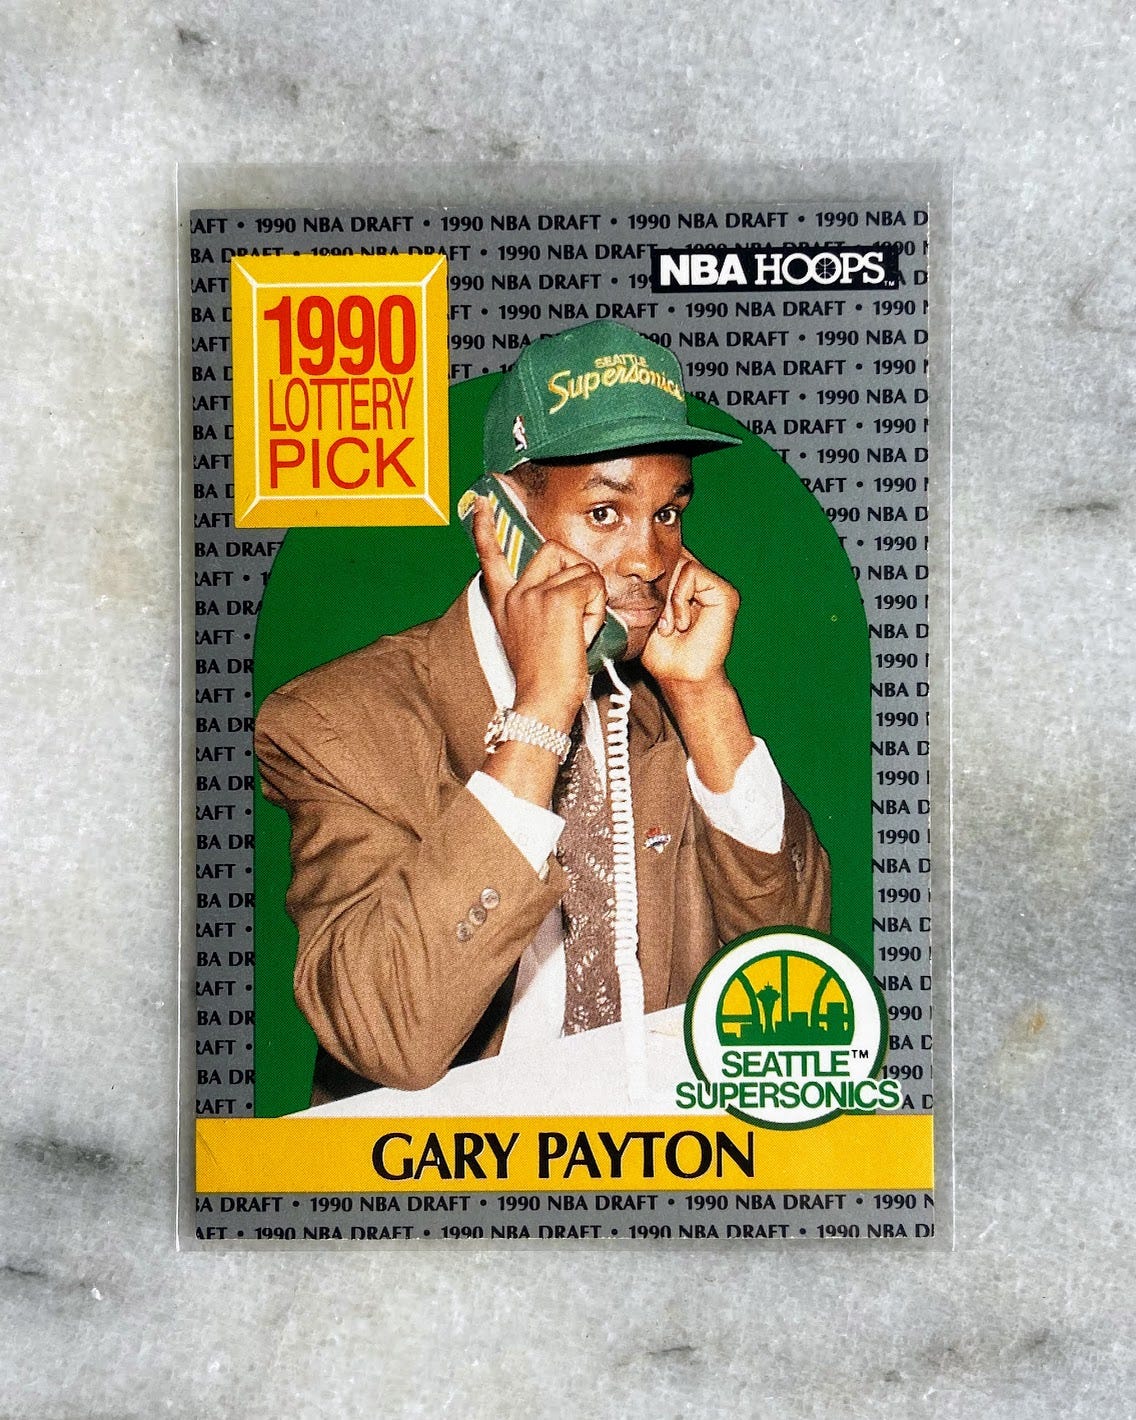 A 1990 basketball card featuring Gary Payton on the phone right after being drafted by the Seattle Supersonics